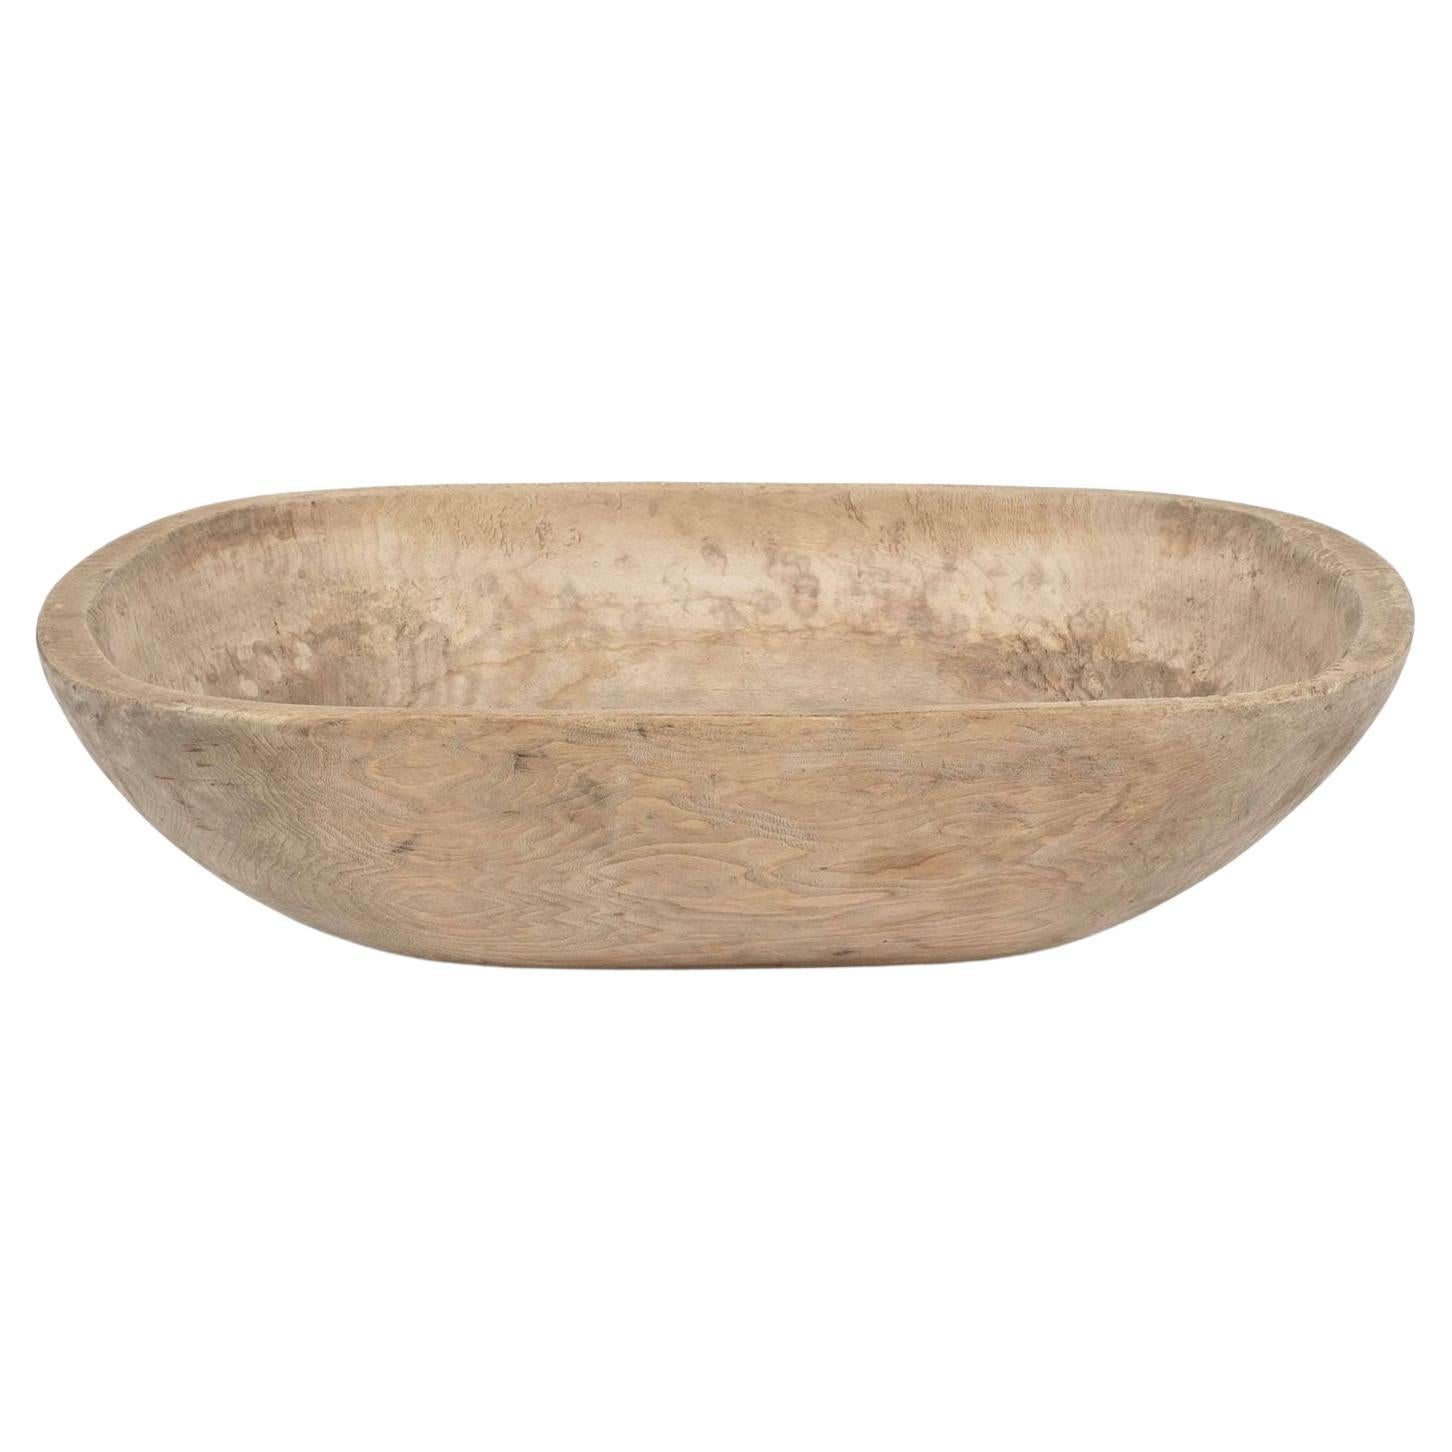 Trencher-Shaped Rustic Swedish Dug Out Bowl